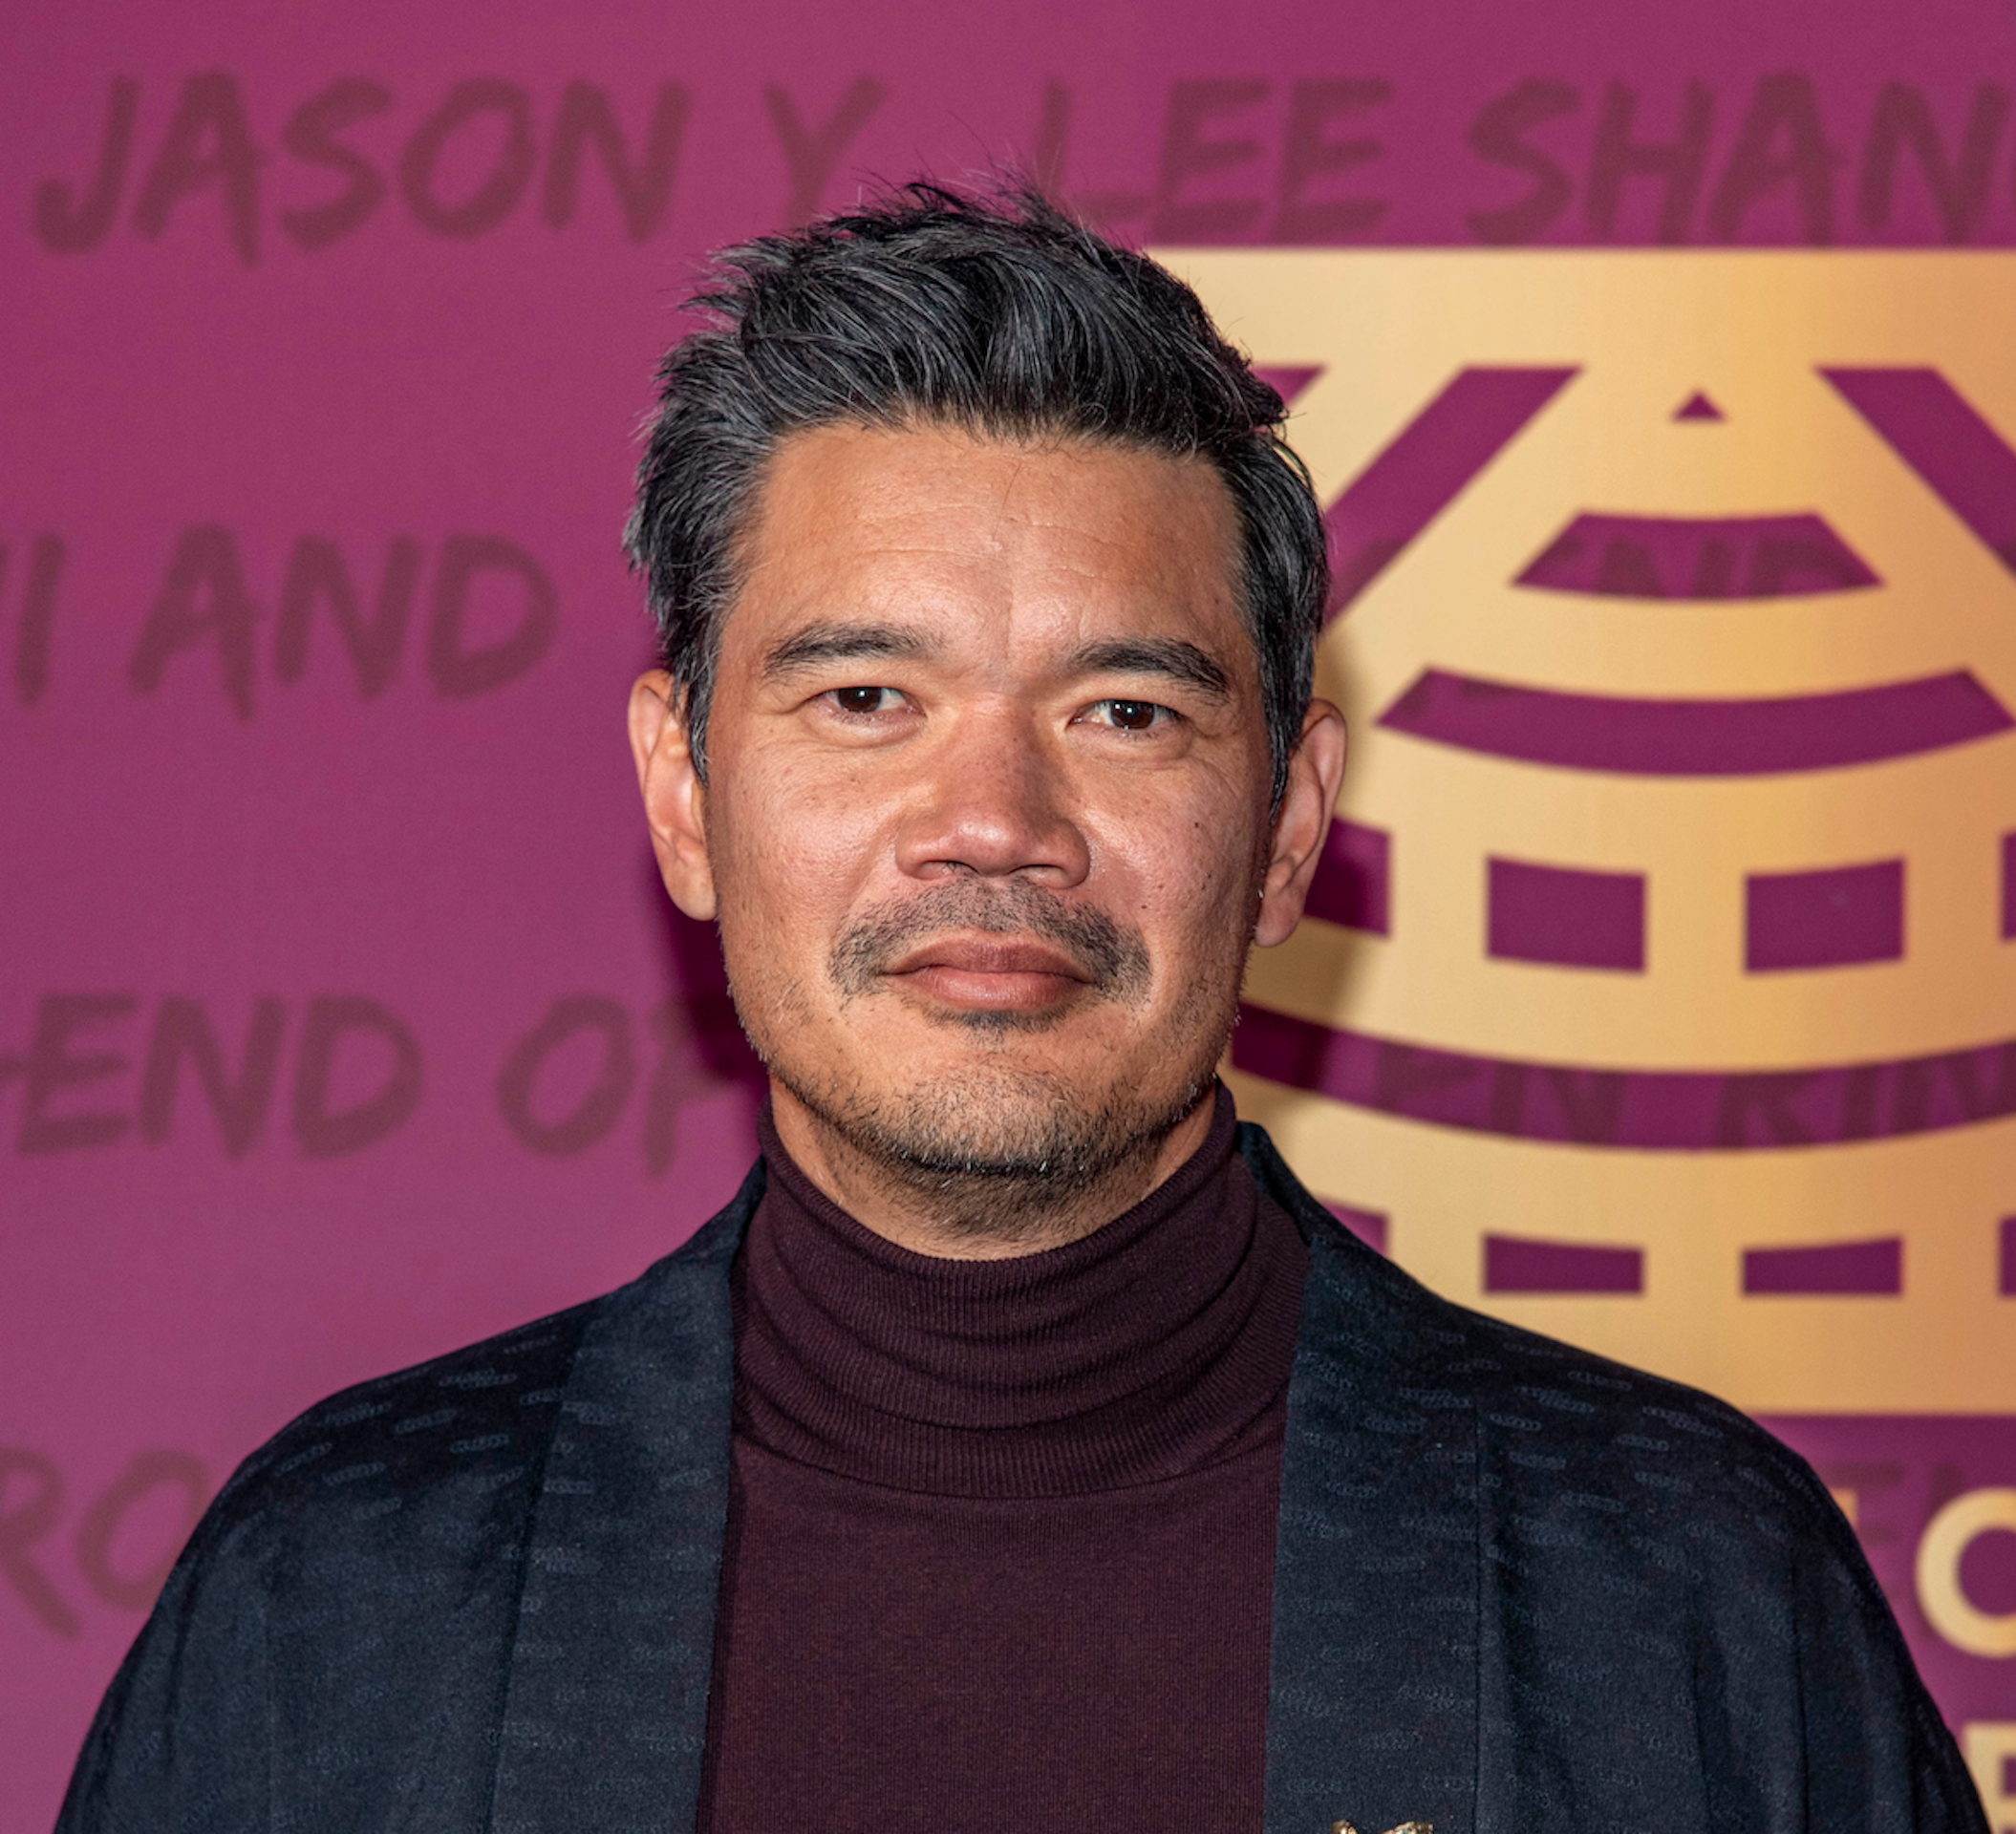 Destin Daniel Cretton, the director behind the hit film Shang-Chi and the Legend of the Ten Rings, is set to direct Avengers: The Kang Dynasty. 